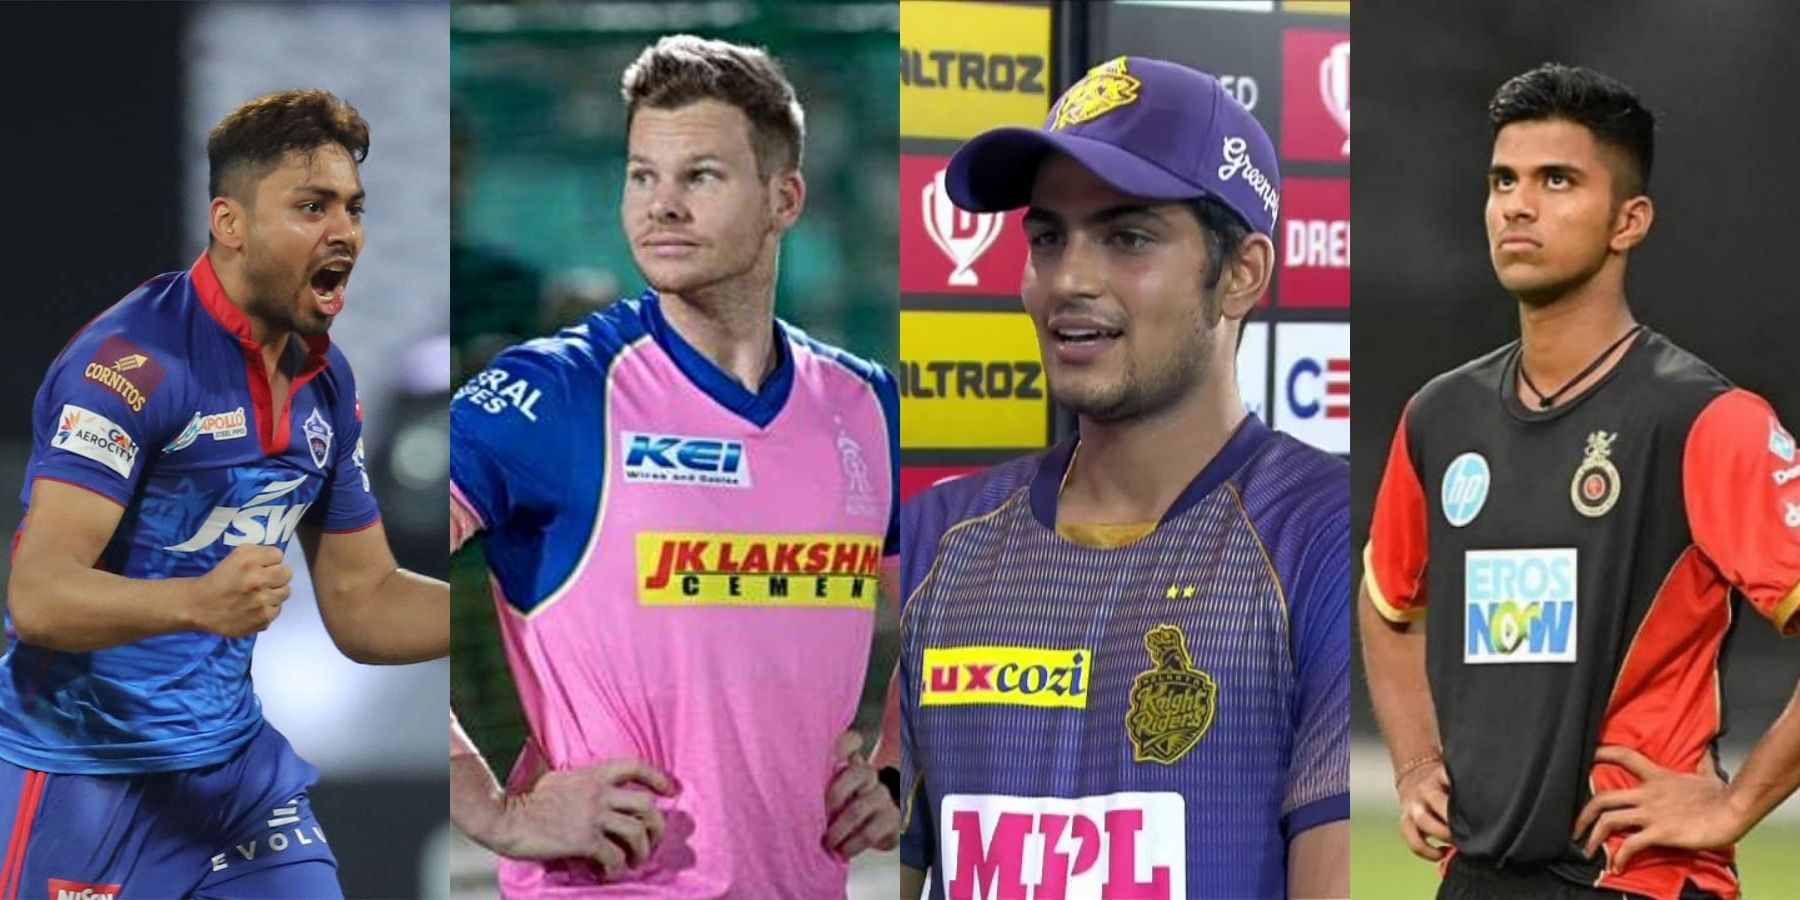 IPL 2021: From Shubman Gill to Washington Sundar, 4 cricketers who got injured after the IPL 2021 phase 1